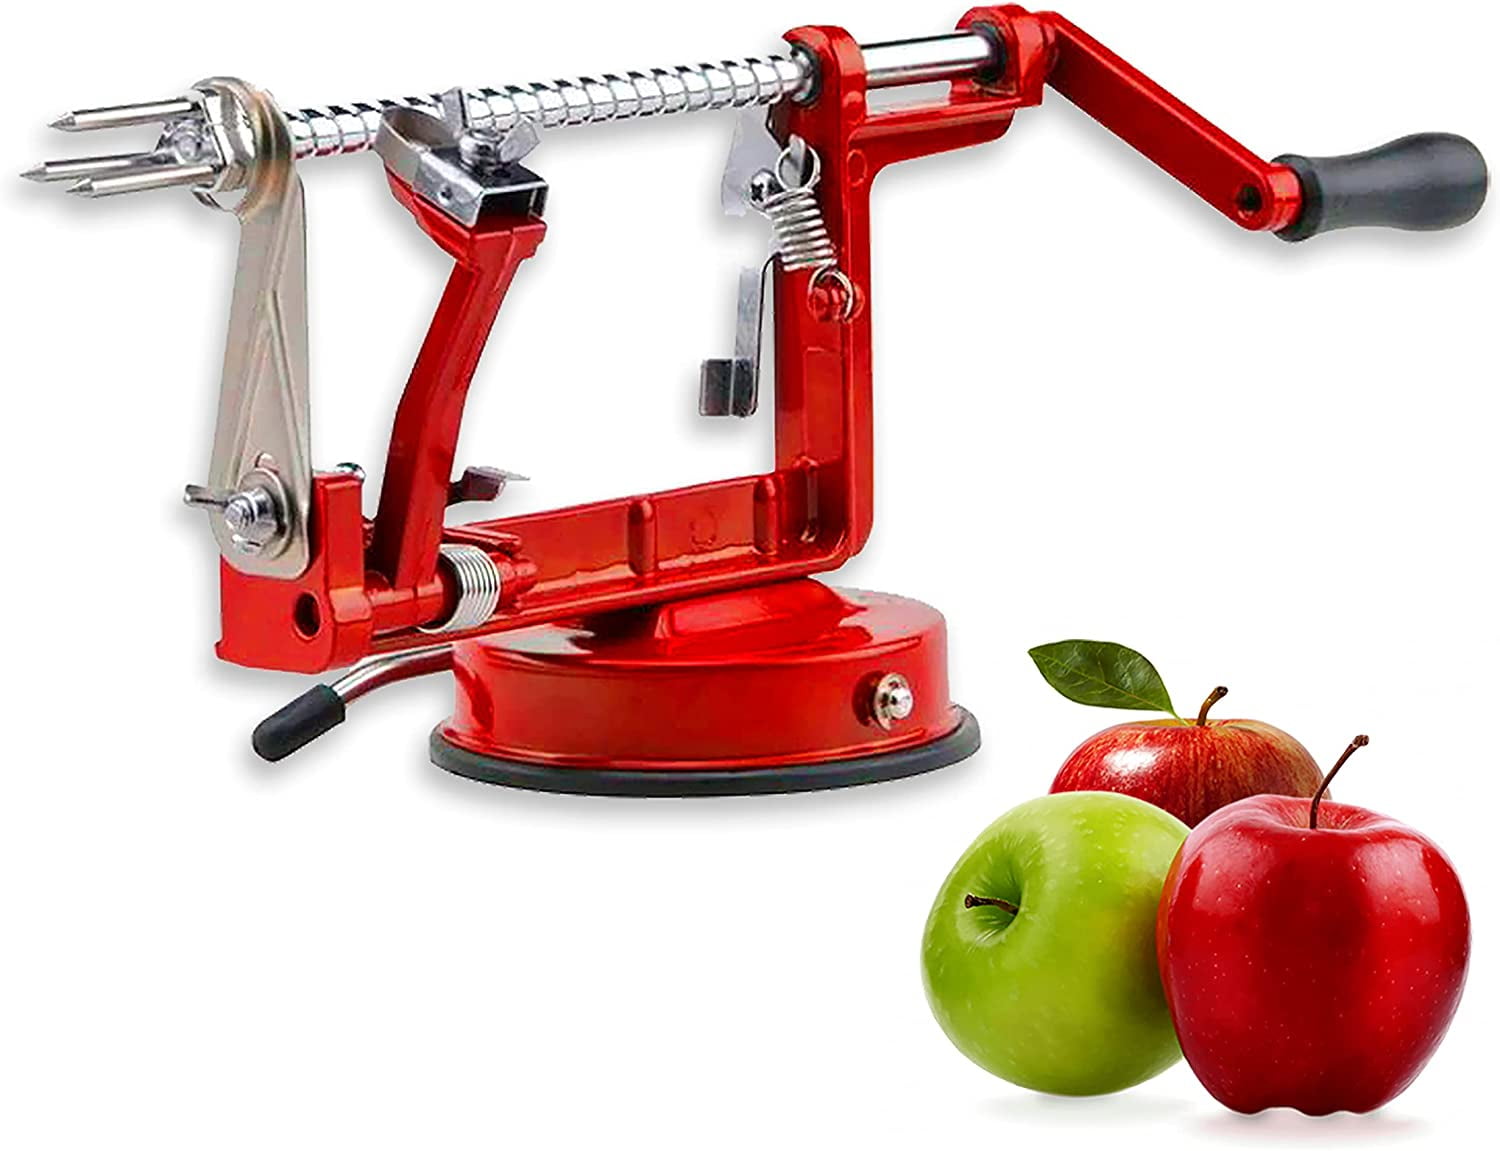 Dropship 3In 1 Apple Peeler Manual Rotation Potato Fruit Core Slicer  Kitchen Hand Cracking Corer to Sell Online at a Lower Price